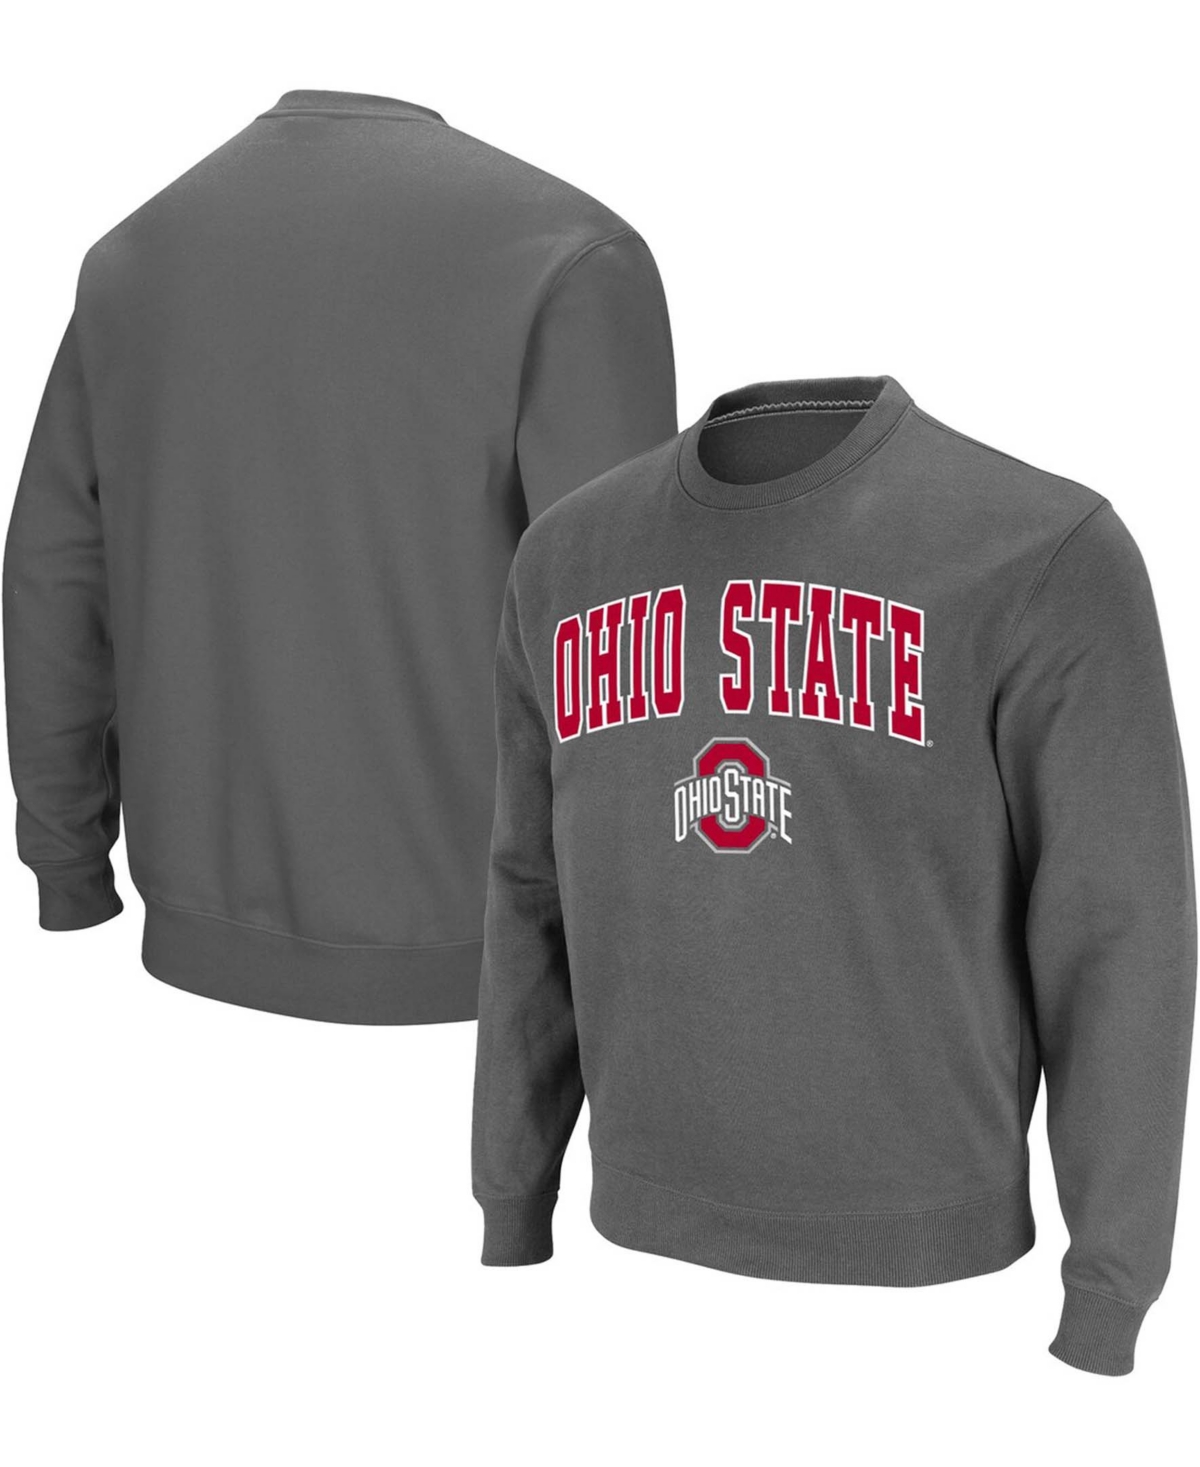 Shop Colosseum Men's Charcoal Ohio State Buckeyes Team Arch Logo Tackle Twill Pullover Sweatshirt